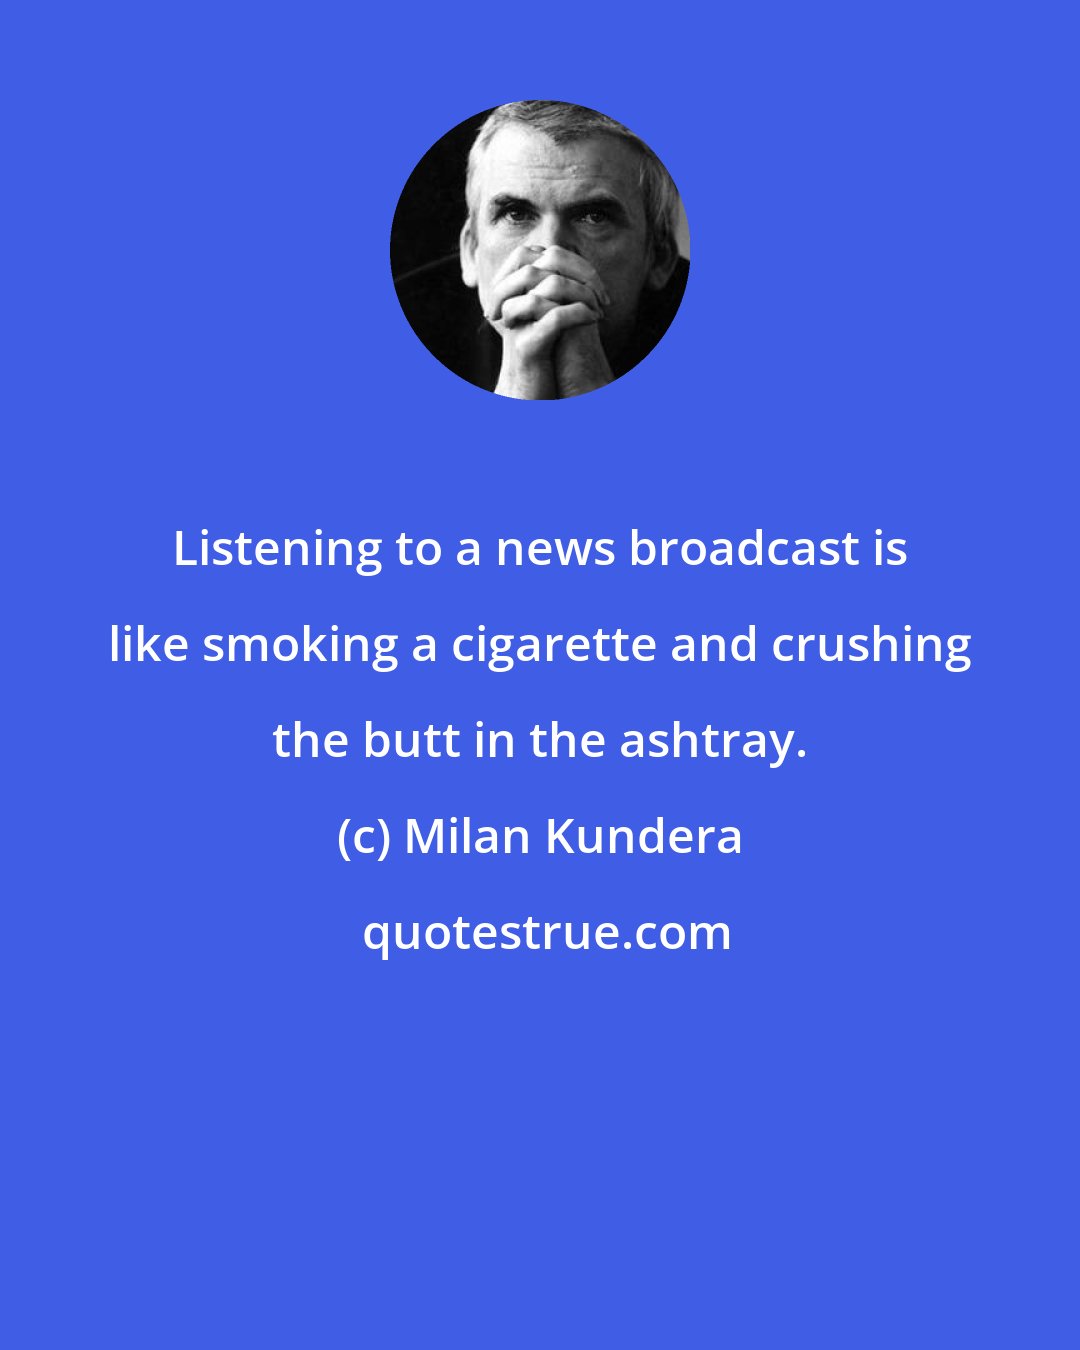 Milan Kundera: Listening to a news broadcast is like smoking a cigarette and crushing the butt in the ashtray.